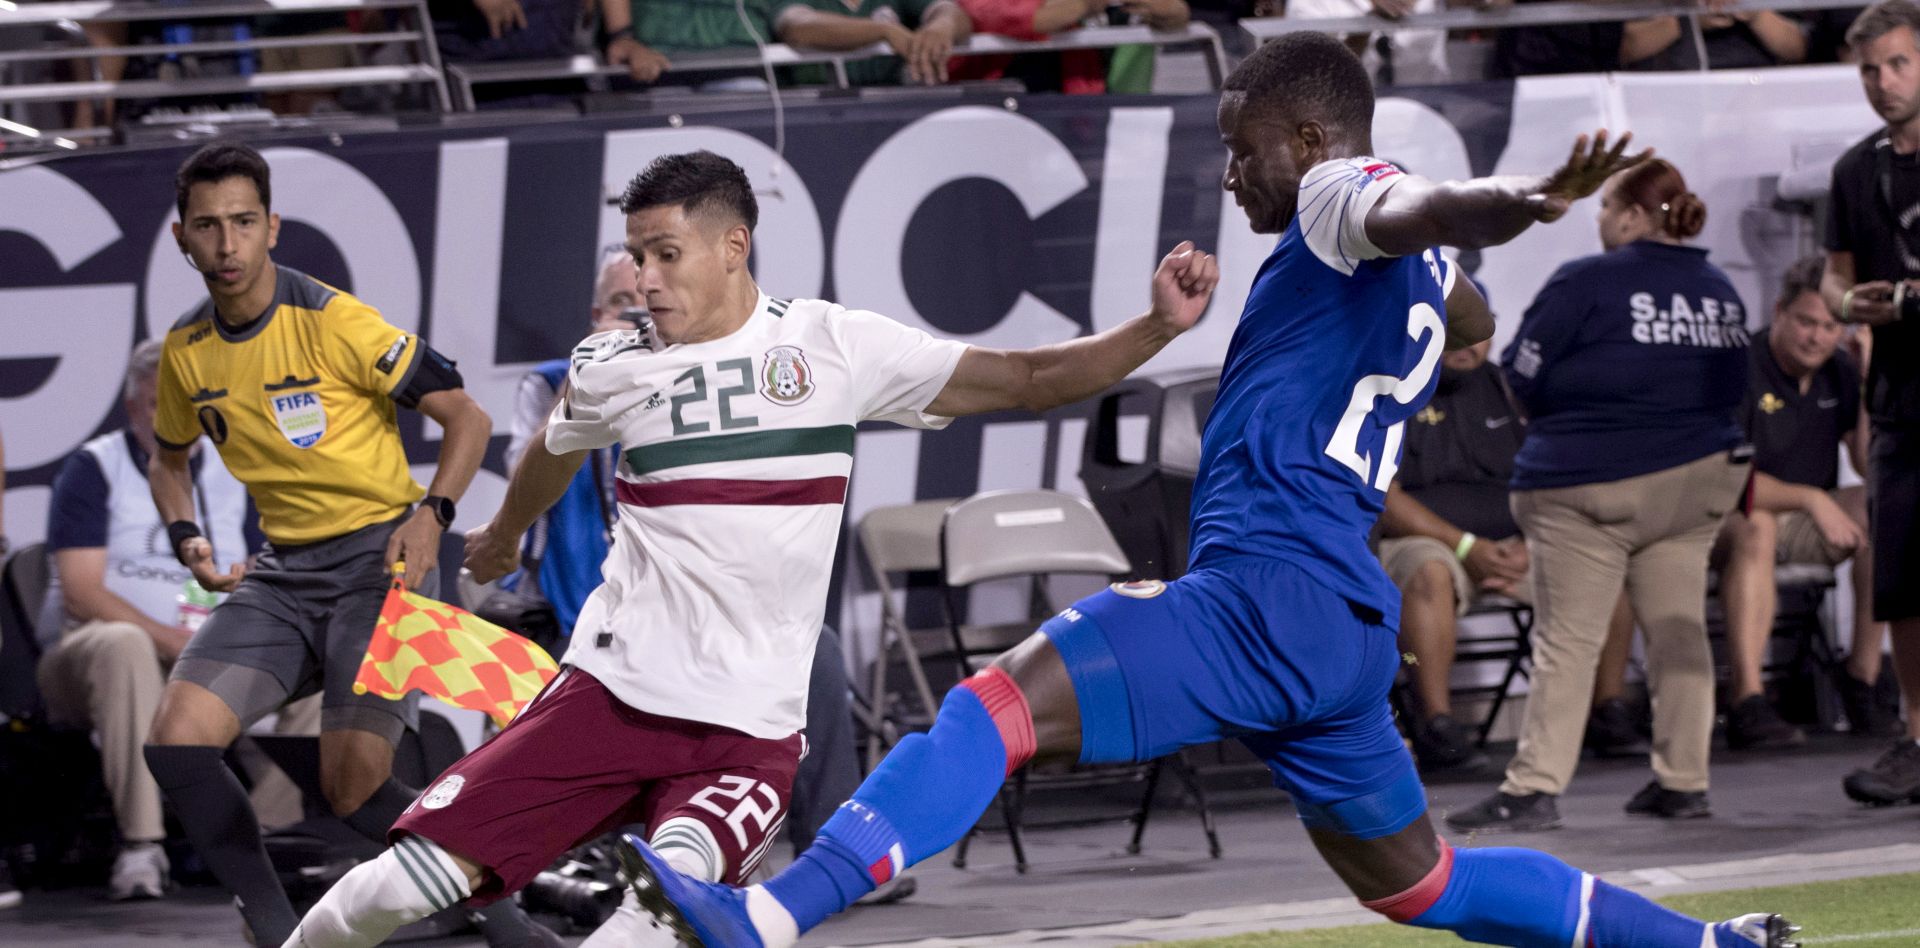 epa07691110 Mexico's Uriel Antuna (L) kicks the ball toward the goal against Haiti's Alex Christian during the semi-final Concacaf Gold Cup match between Haiti and Mexico at State Farm Stadium in Glendale, Arizona, USA, 02 July 2019. Mexico won the match in overtime 1-0.  EPA/RICK D'ELIA